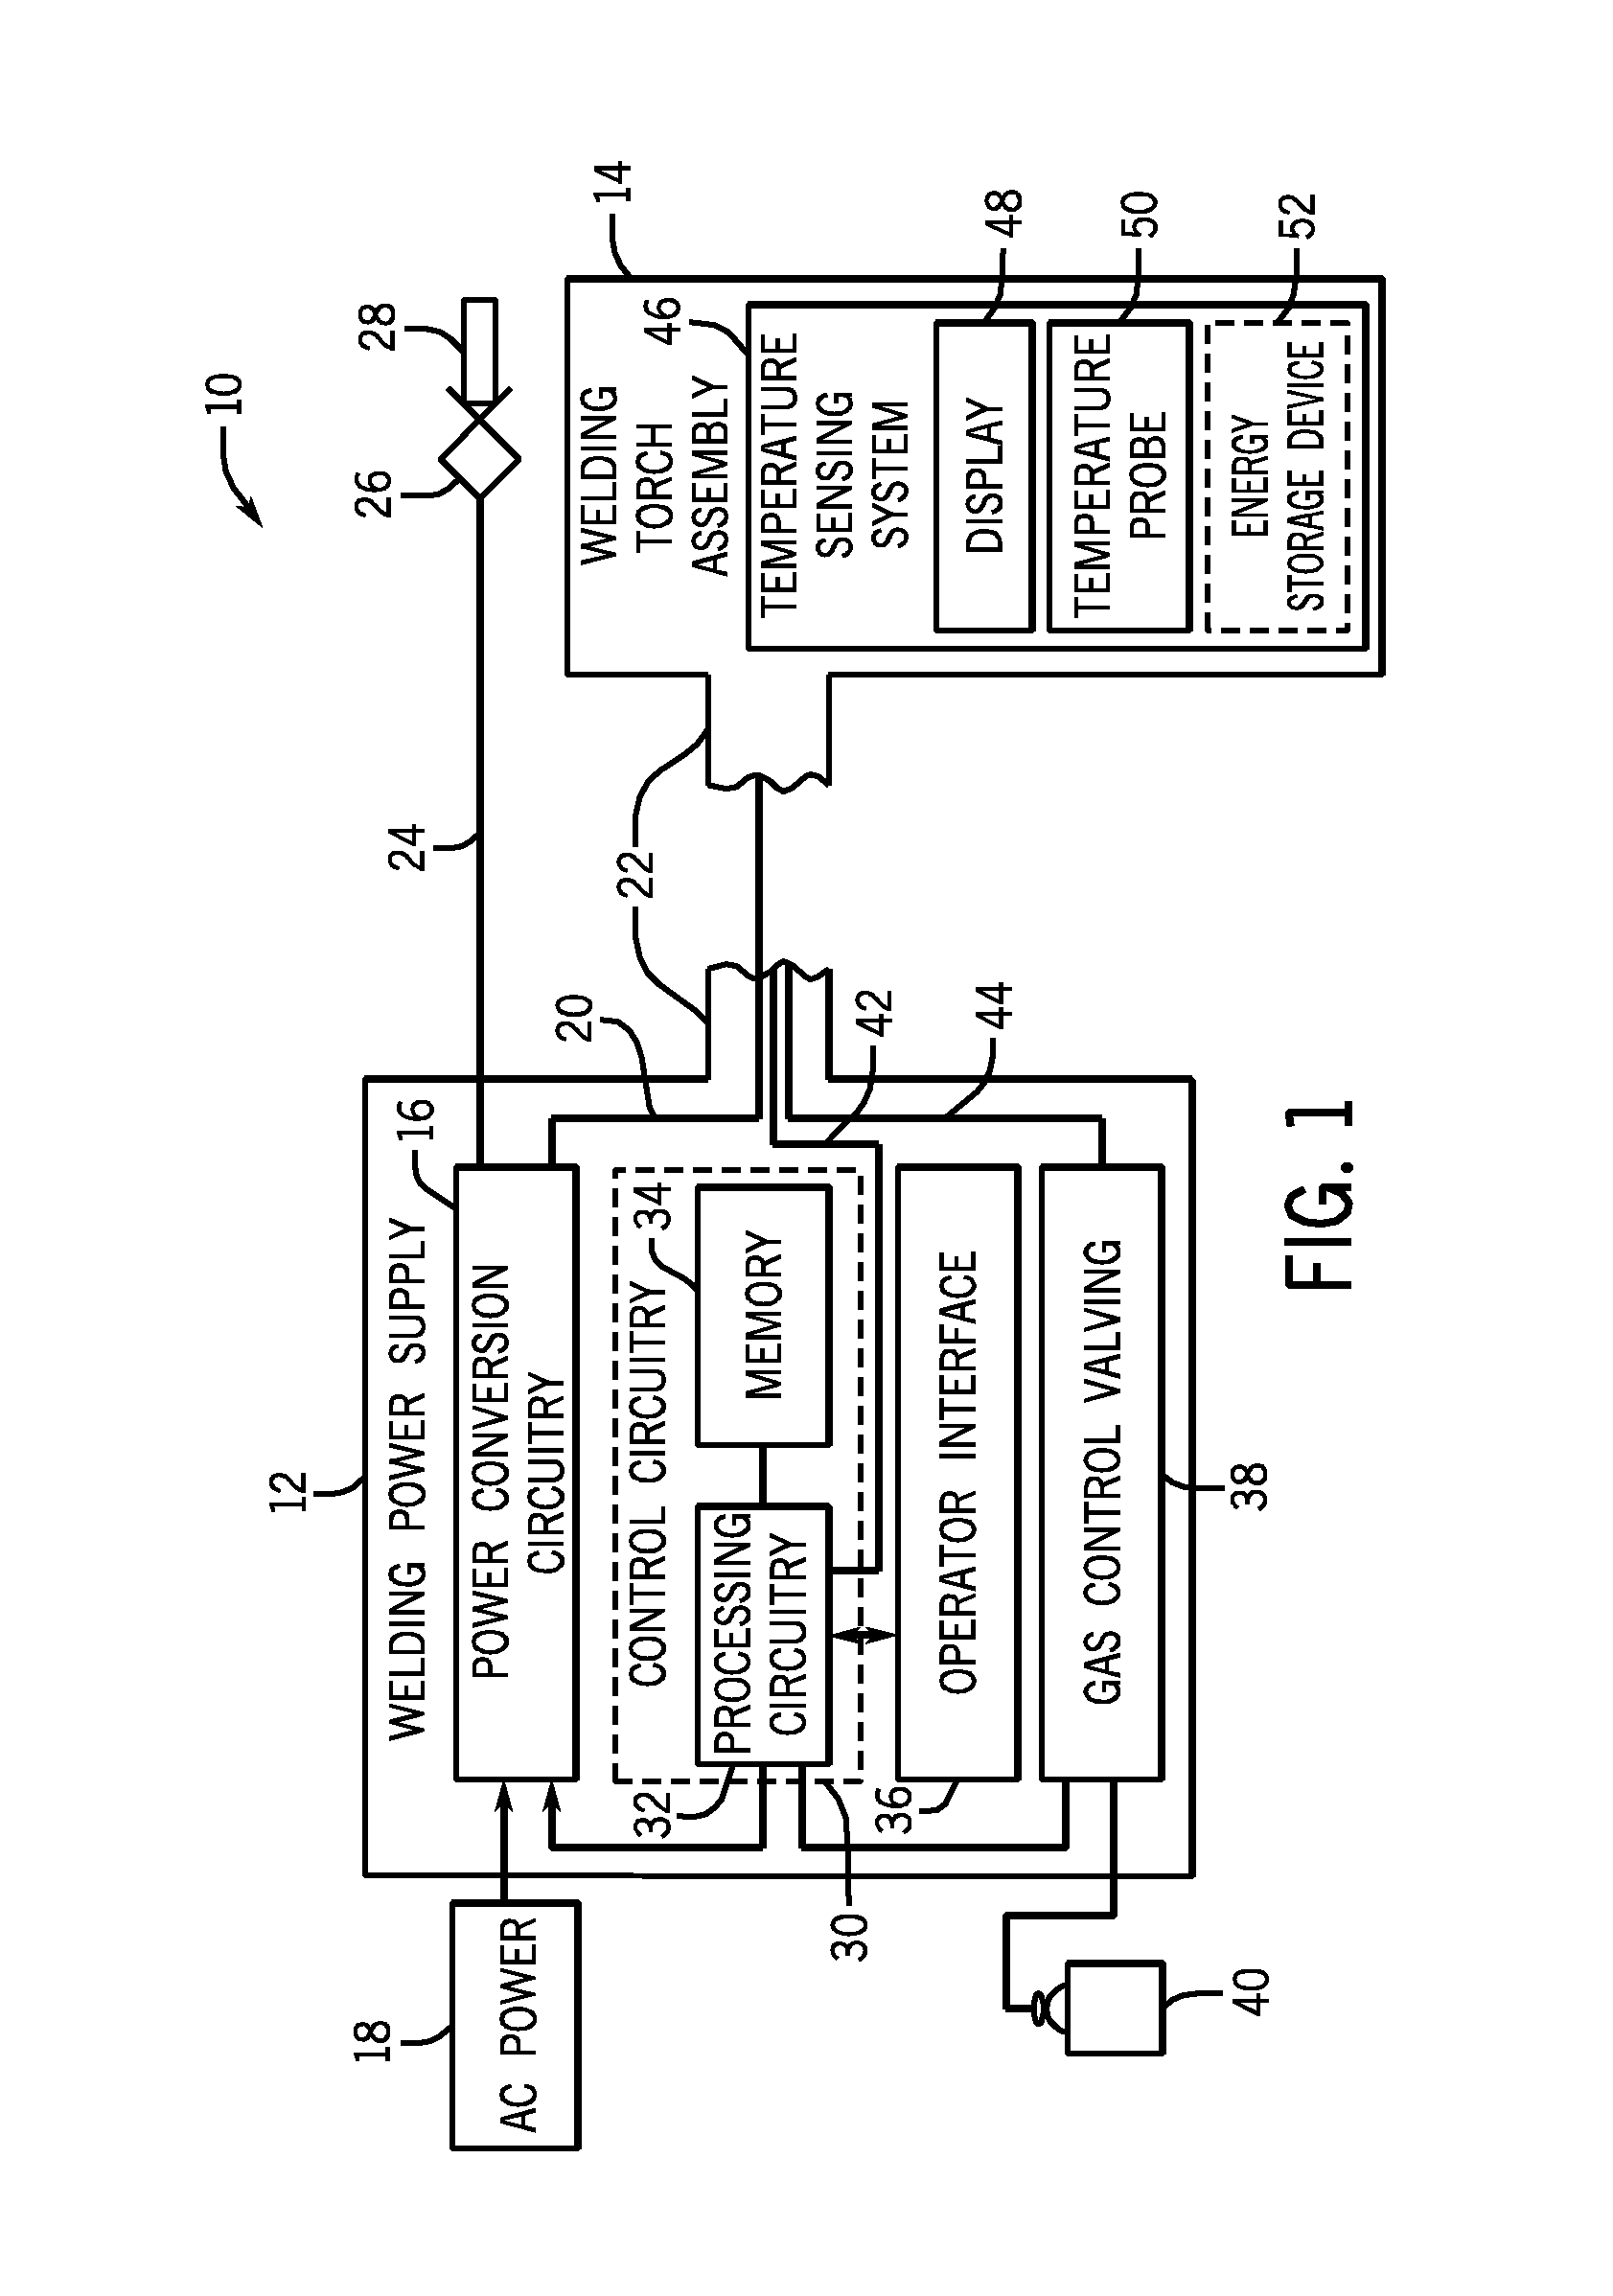 Welding torch with a temperature measurement device